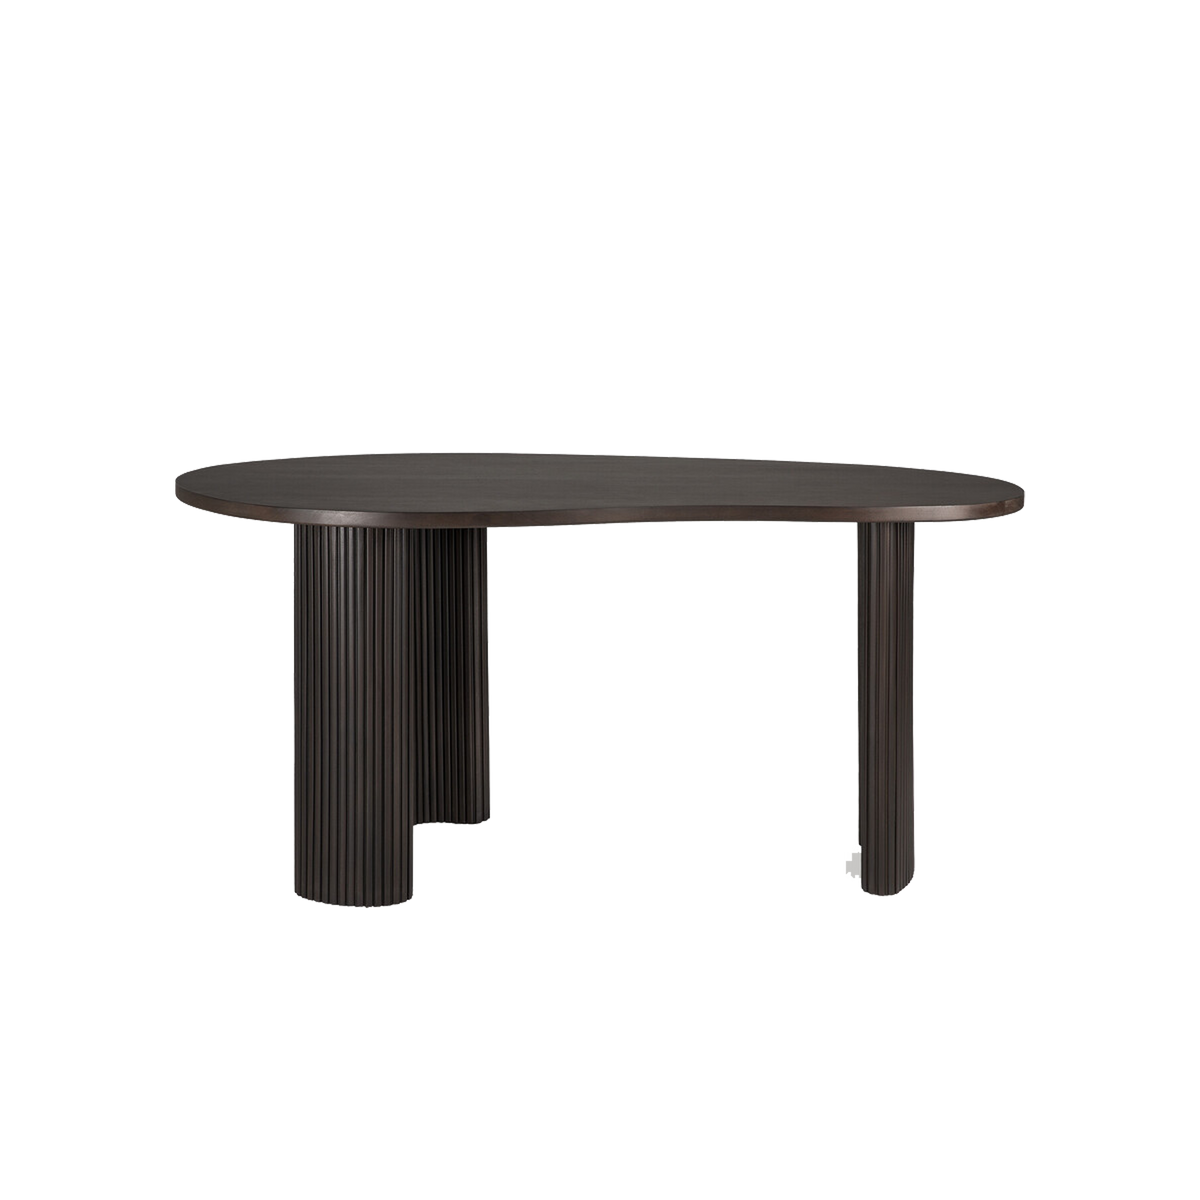 Drawing inspiration from natural shapes, the Caldwell Desk presents a playful design for your space.